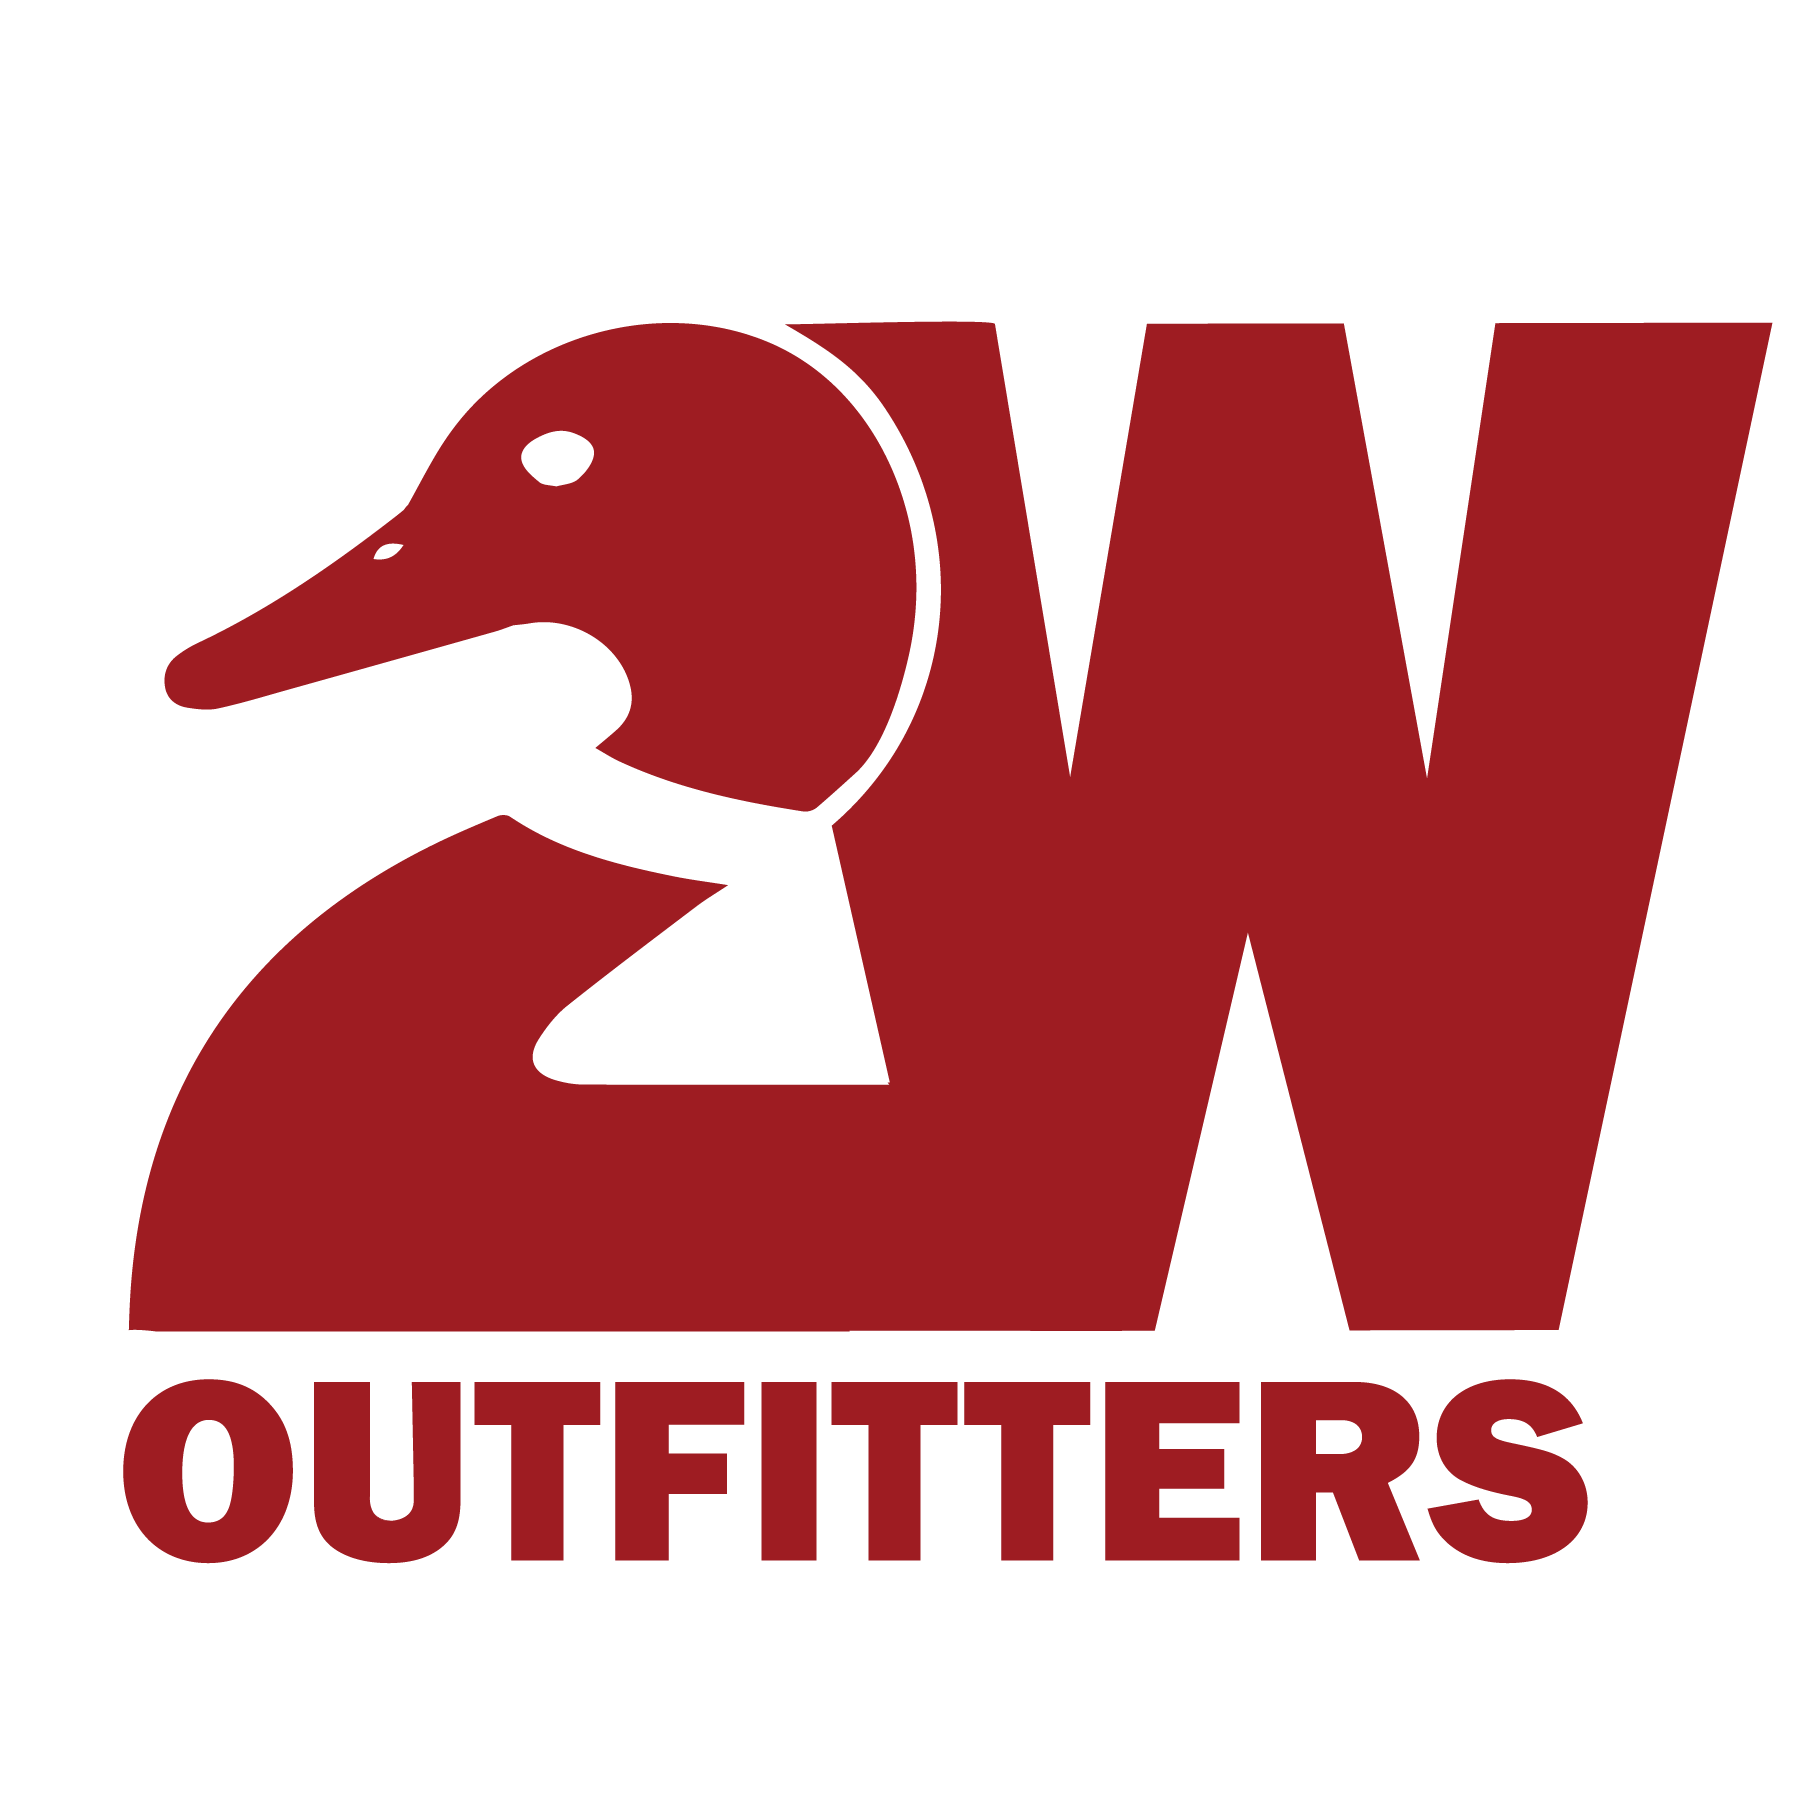 2W Outfitters